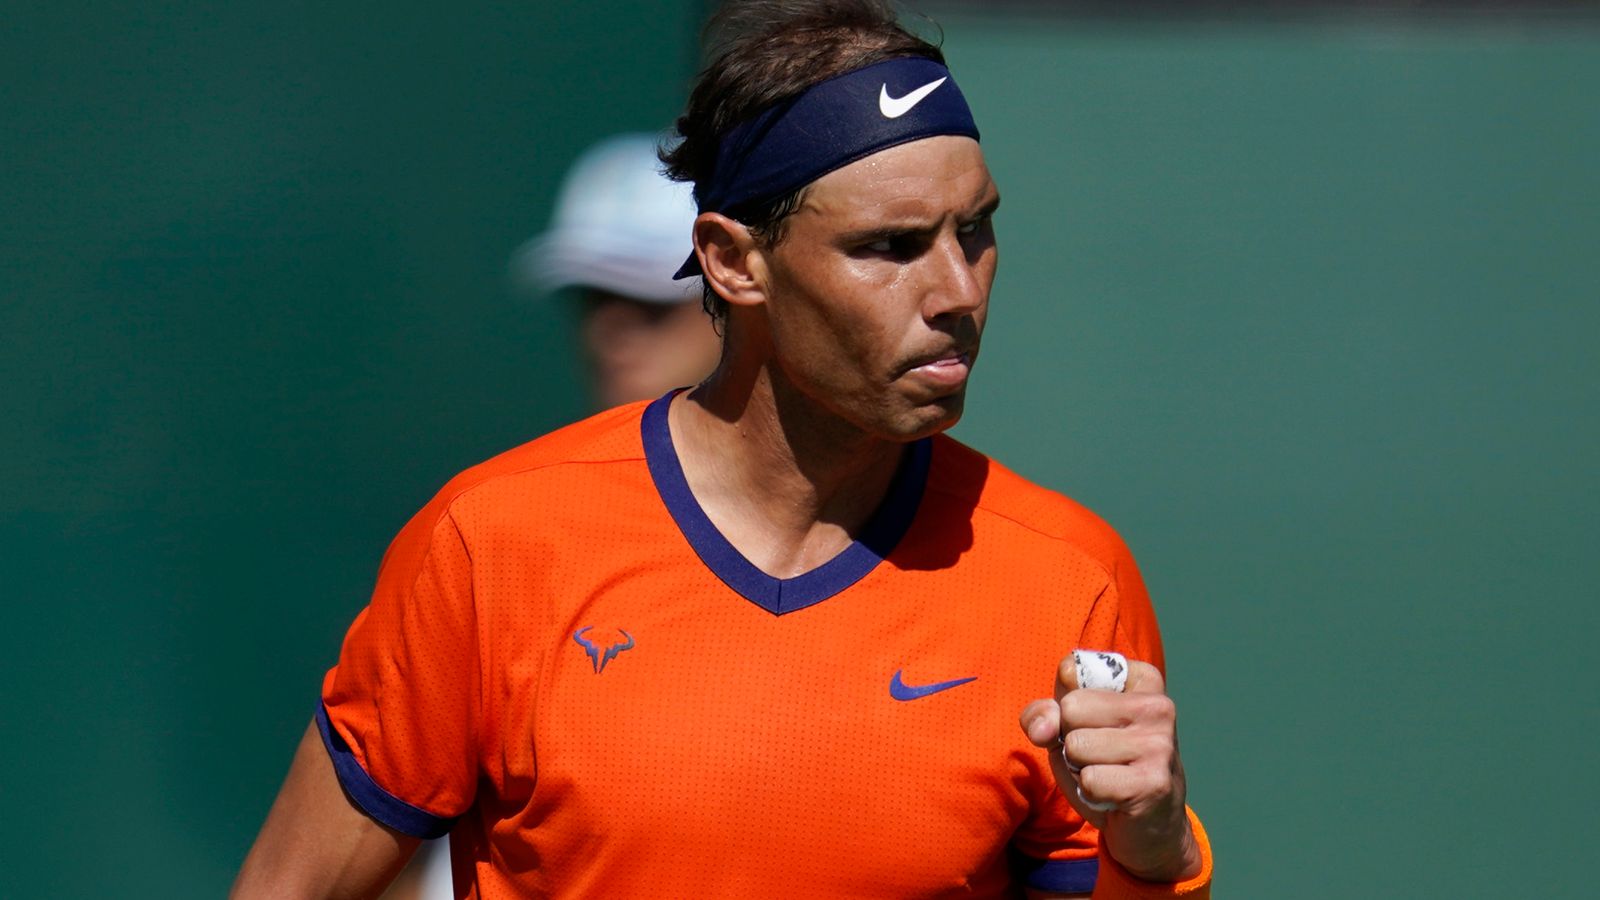 French Open: Rafael Nadal eases through to second round with straight sets win against Jordan Thompson